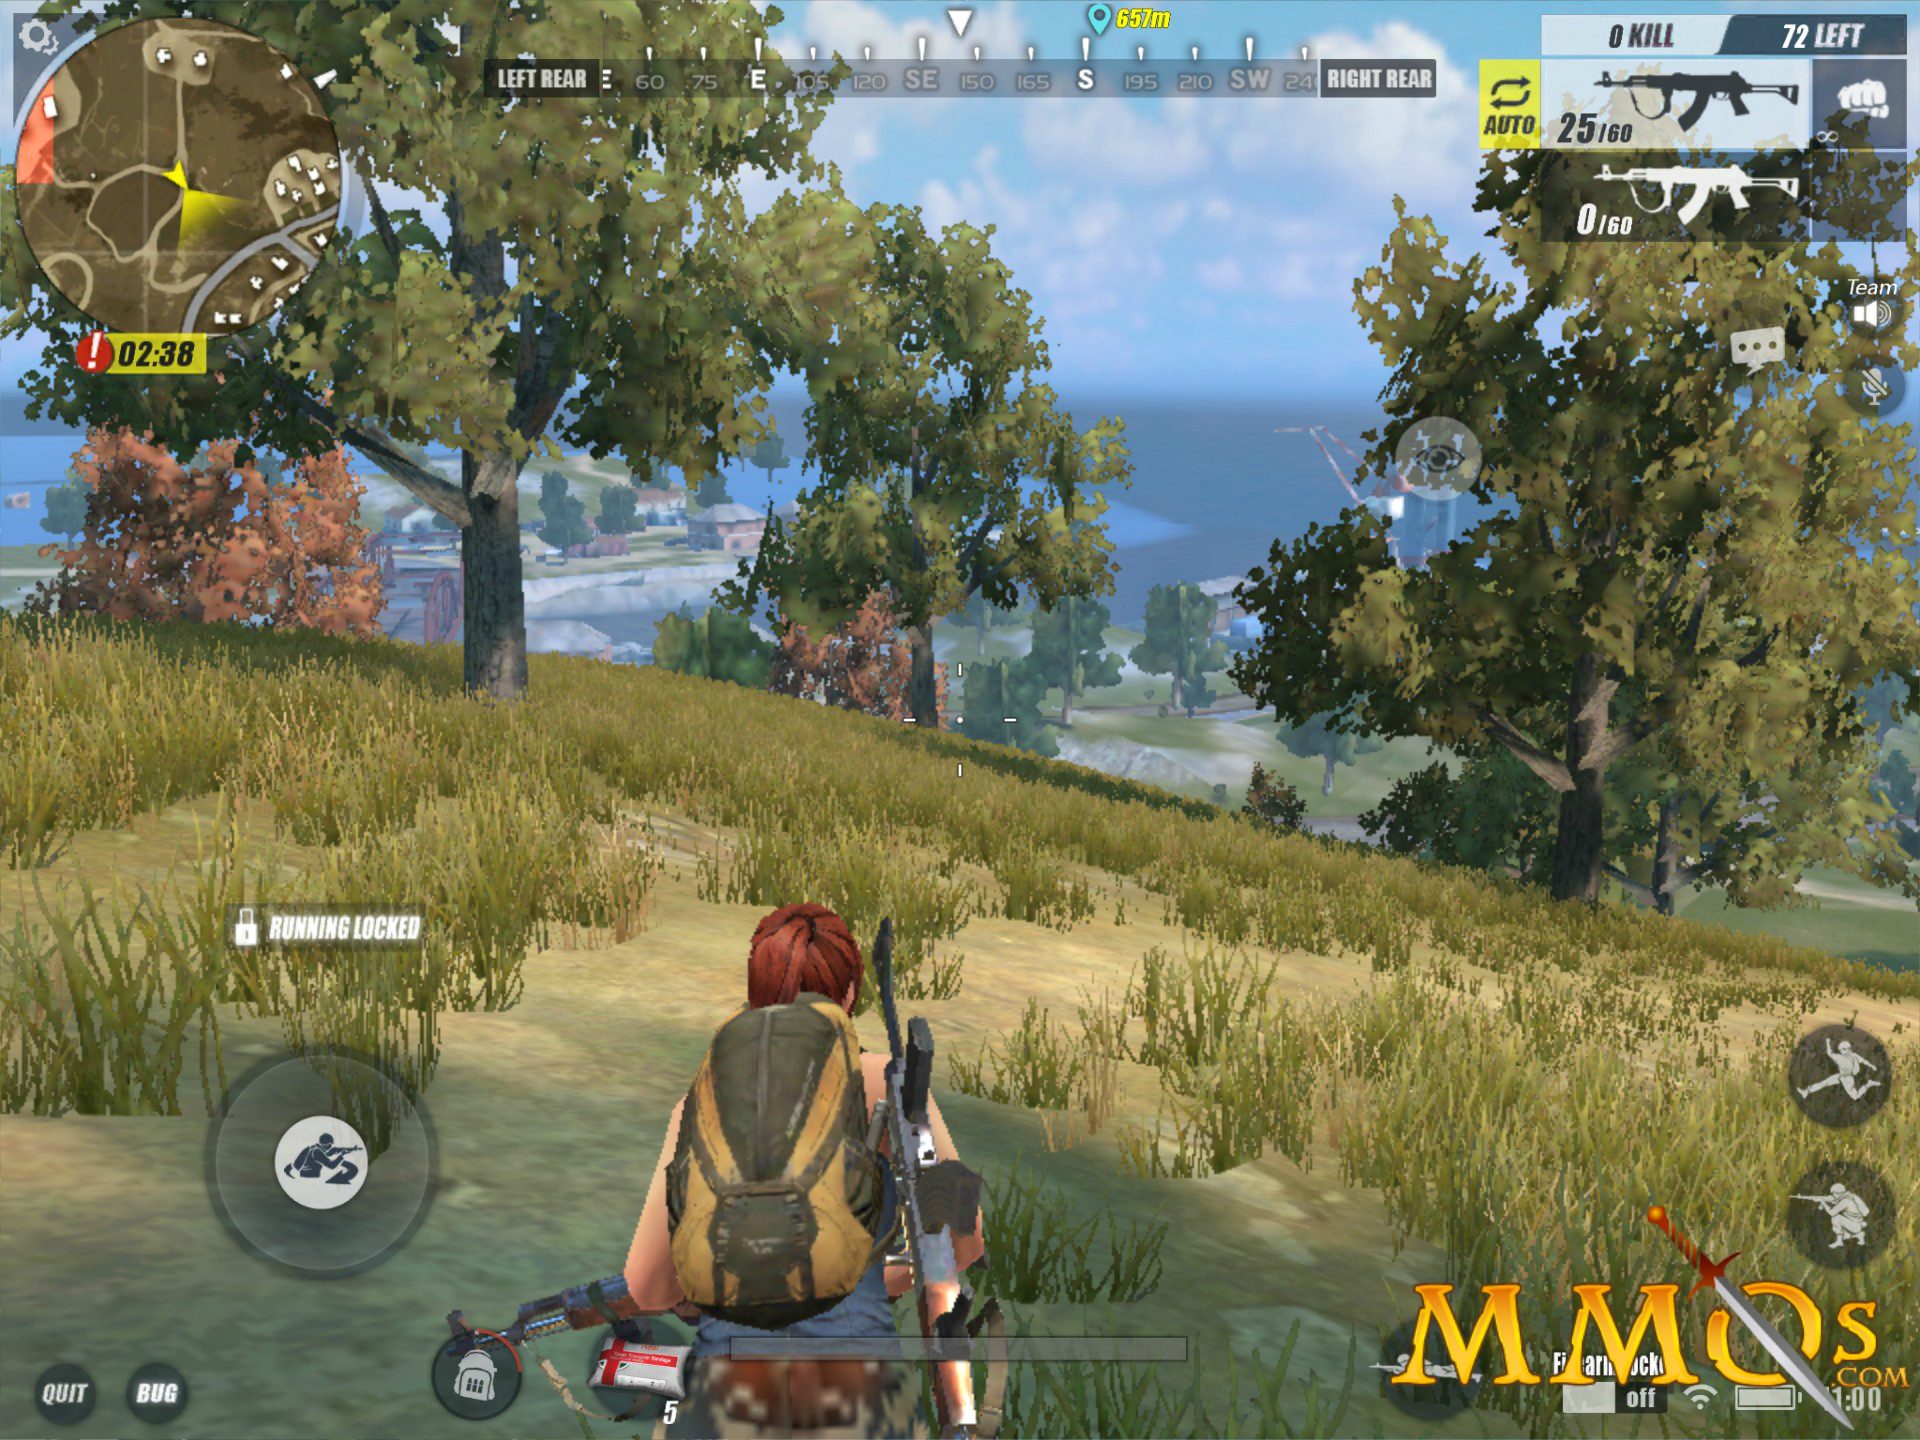 rules of survival download latest version